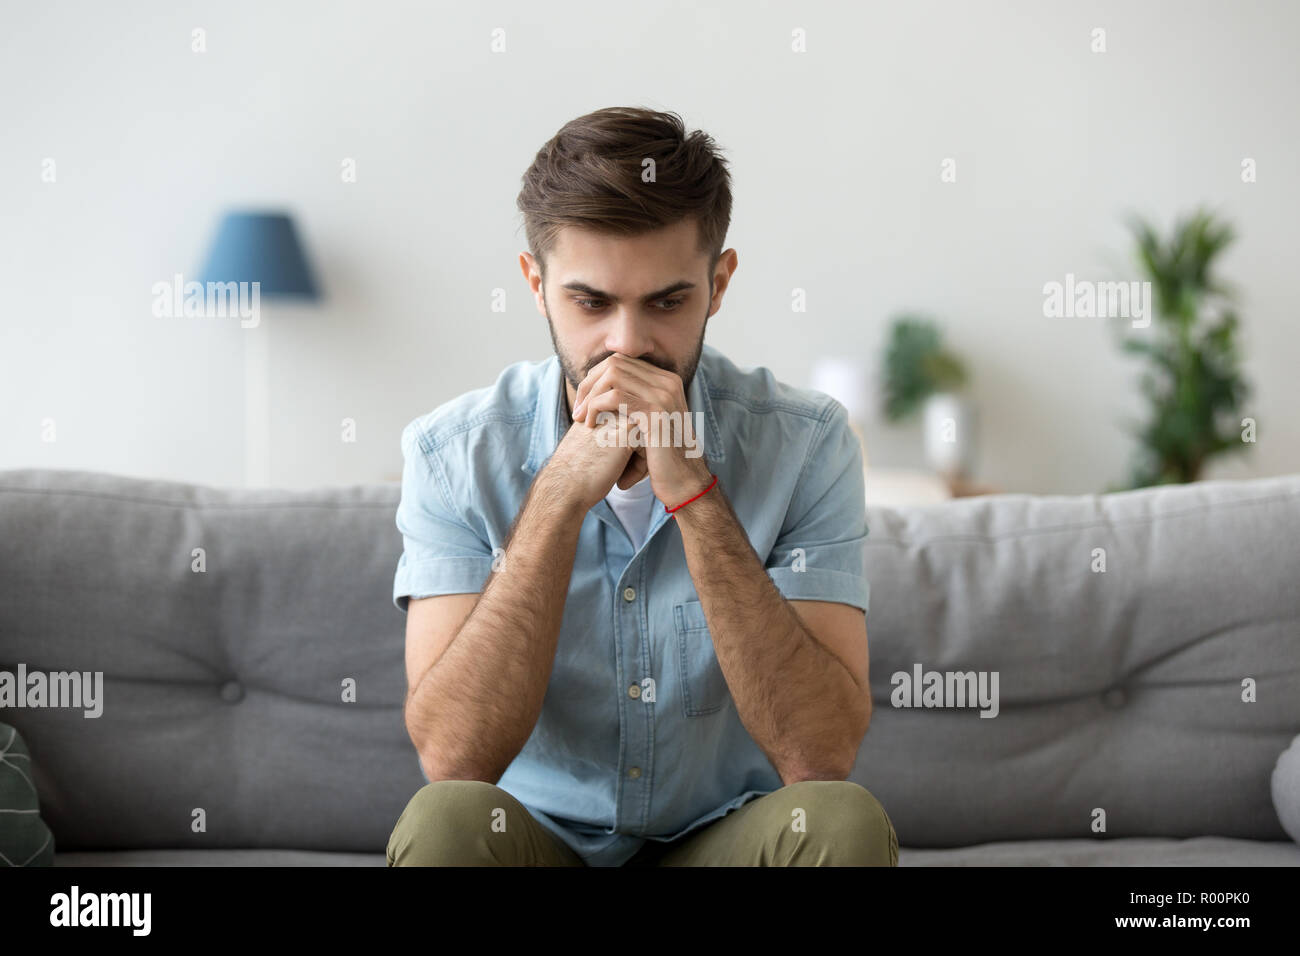 Serious pensive man sitting thinking at home Stock Photo